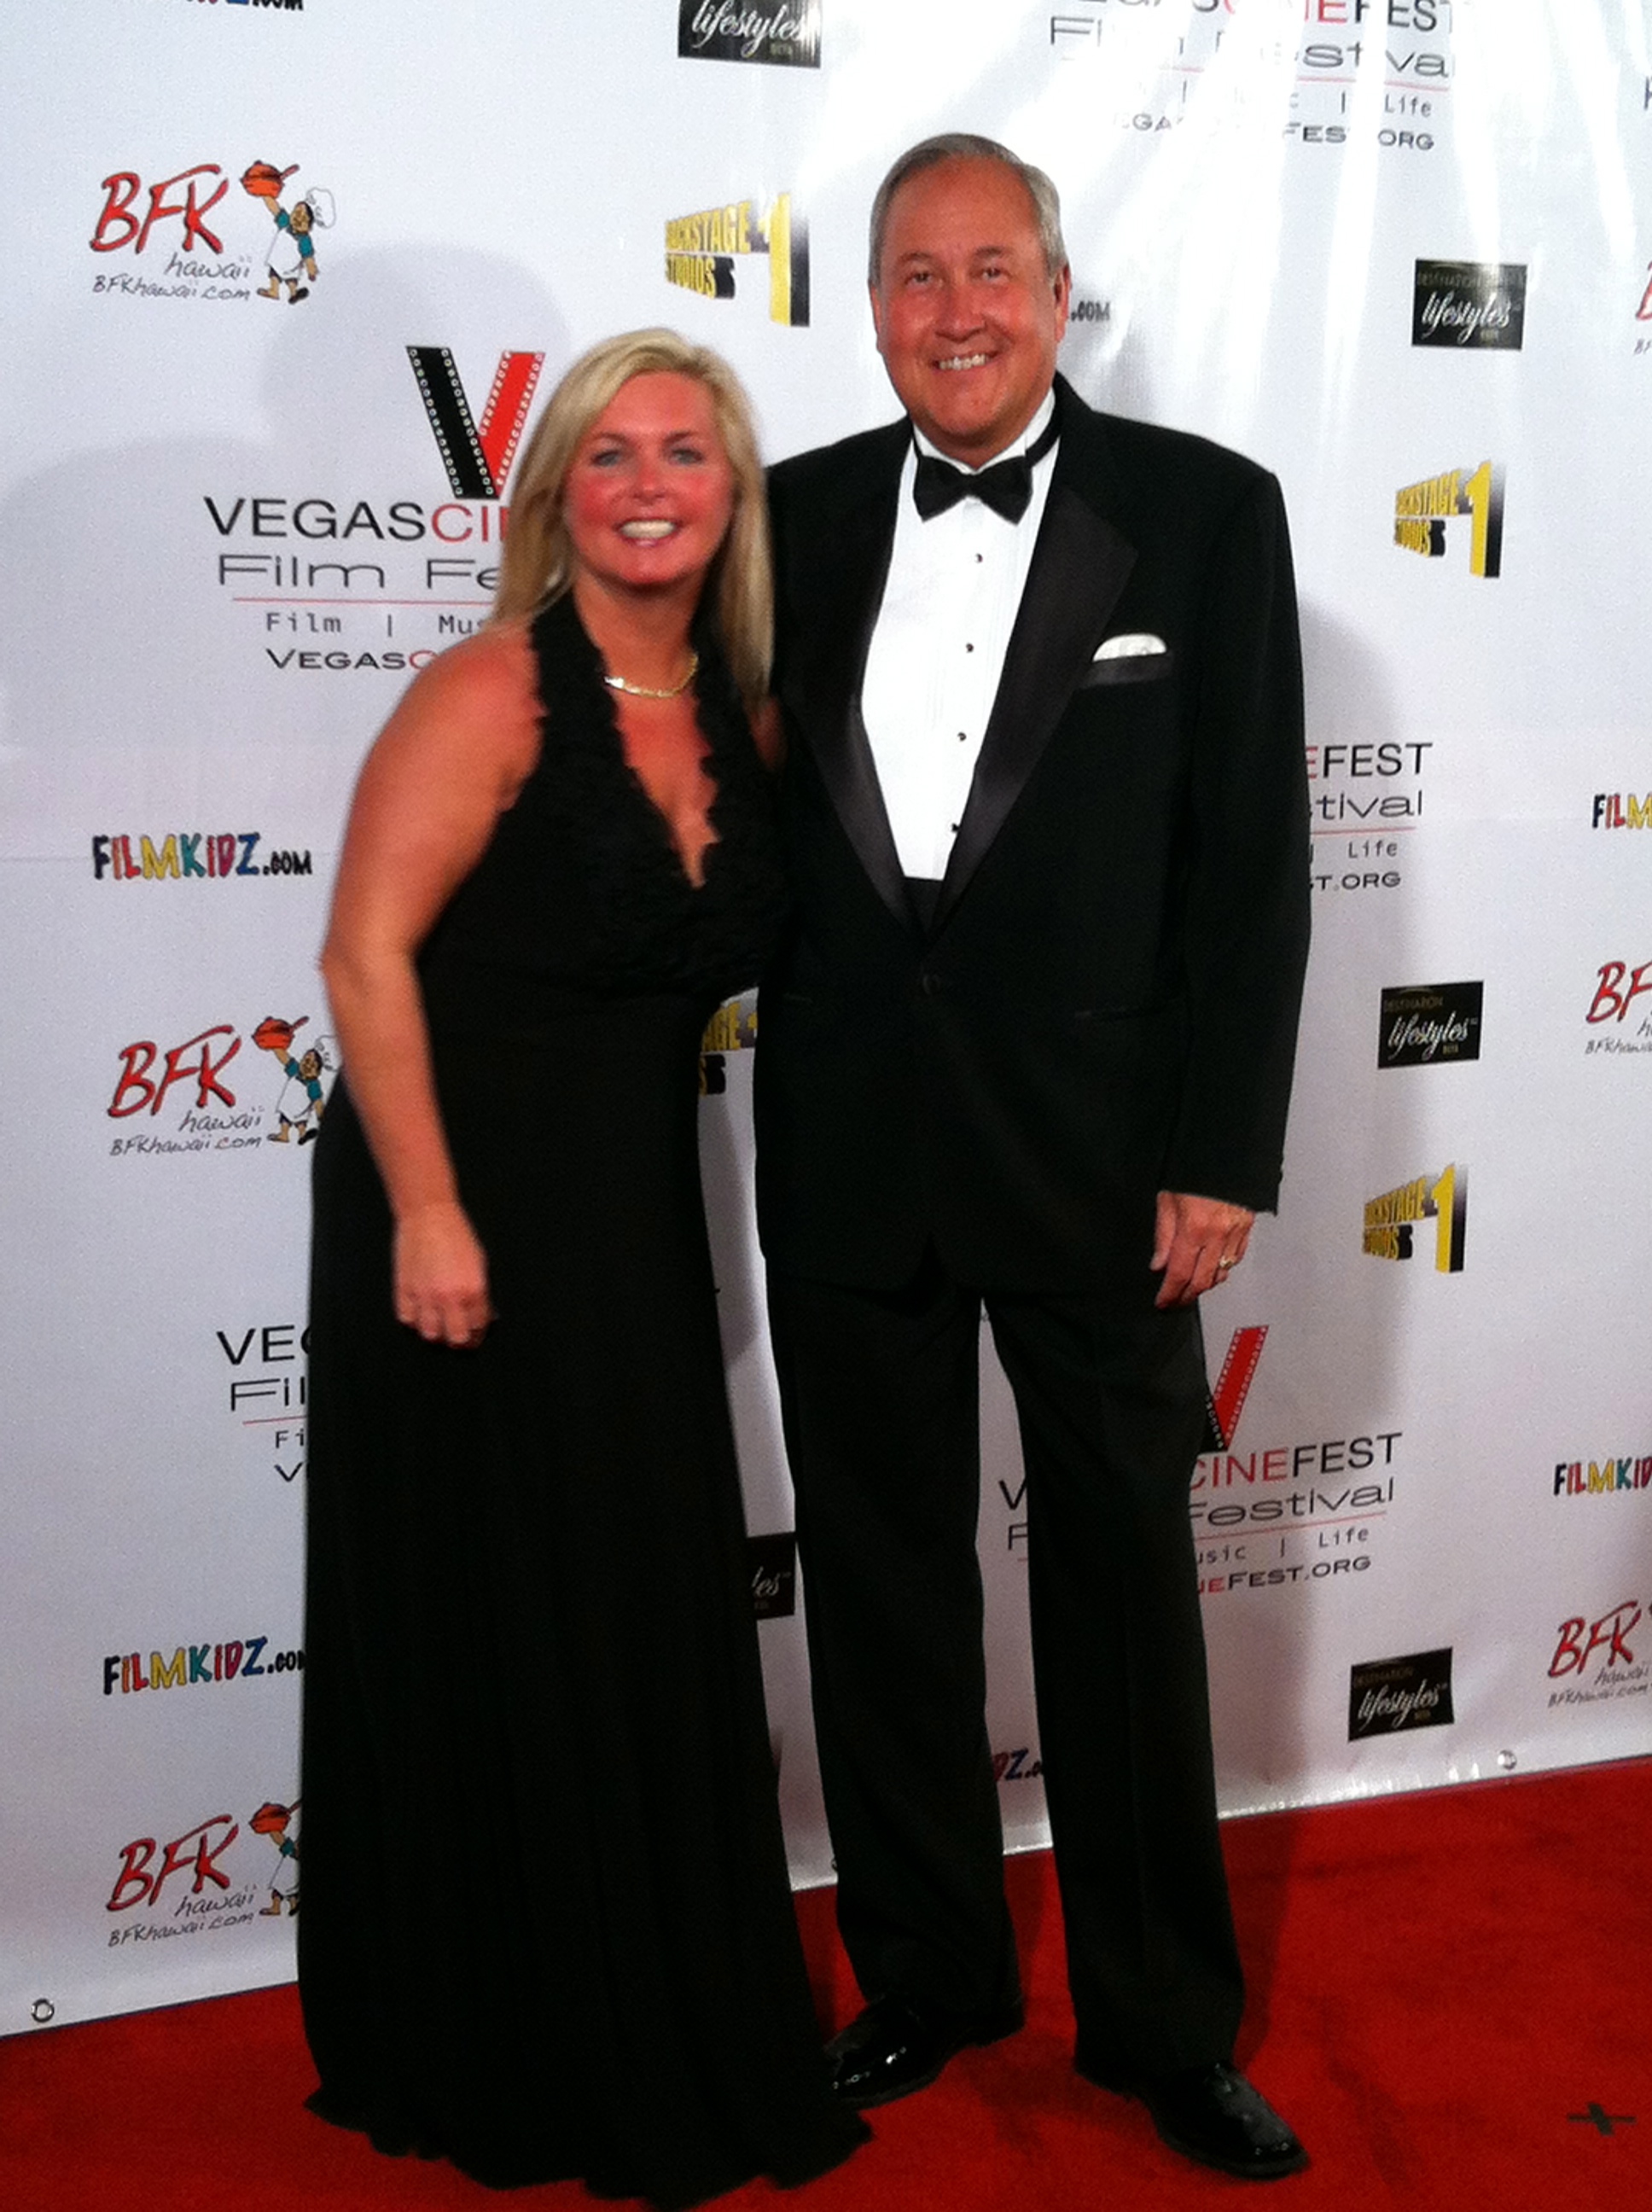 Mike & Dena Wargo on the red carpet at the Vegas Cine Fest Awards Ceremony.